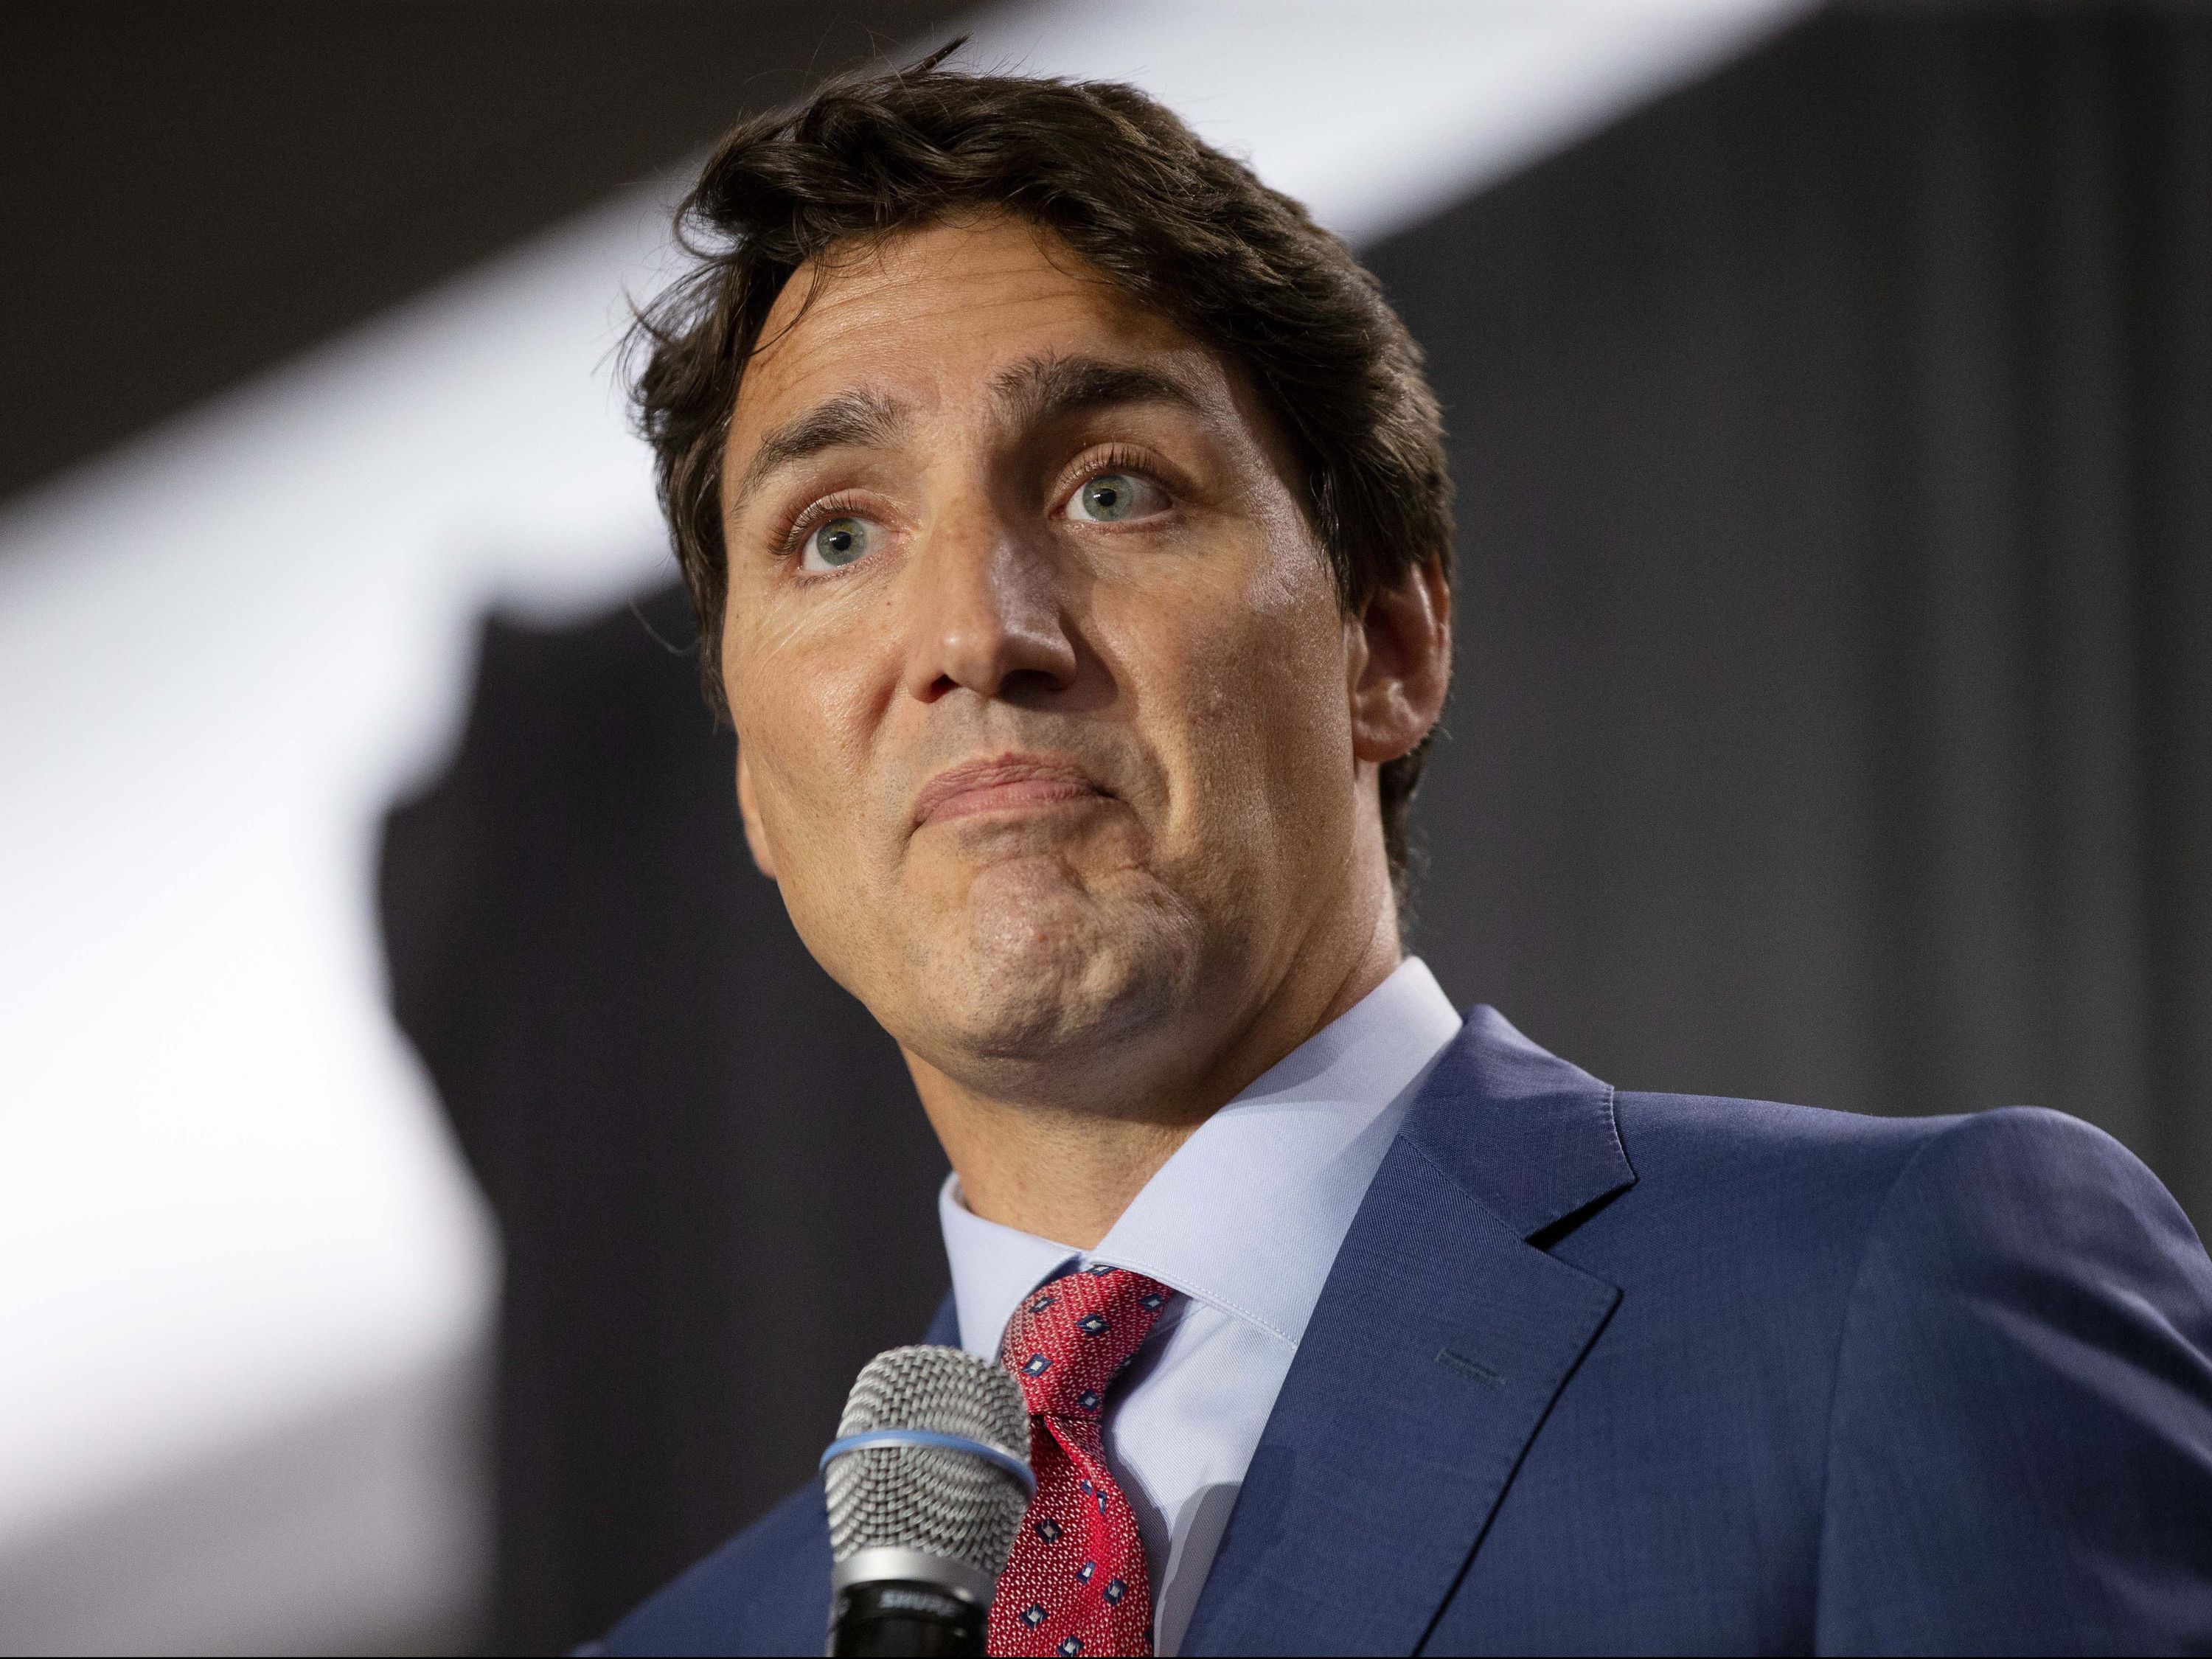 MARIN: PM Justin Trudeau all talk and no substance ...
